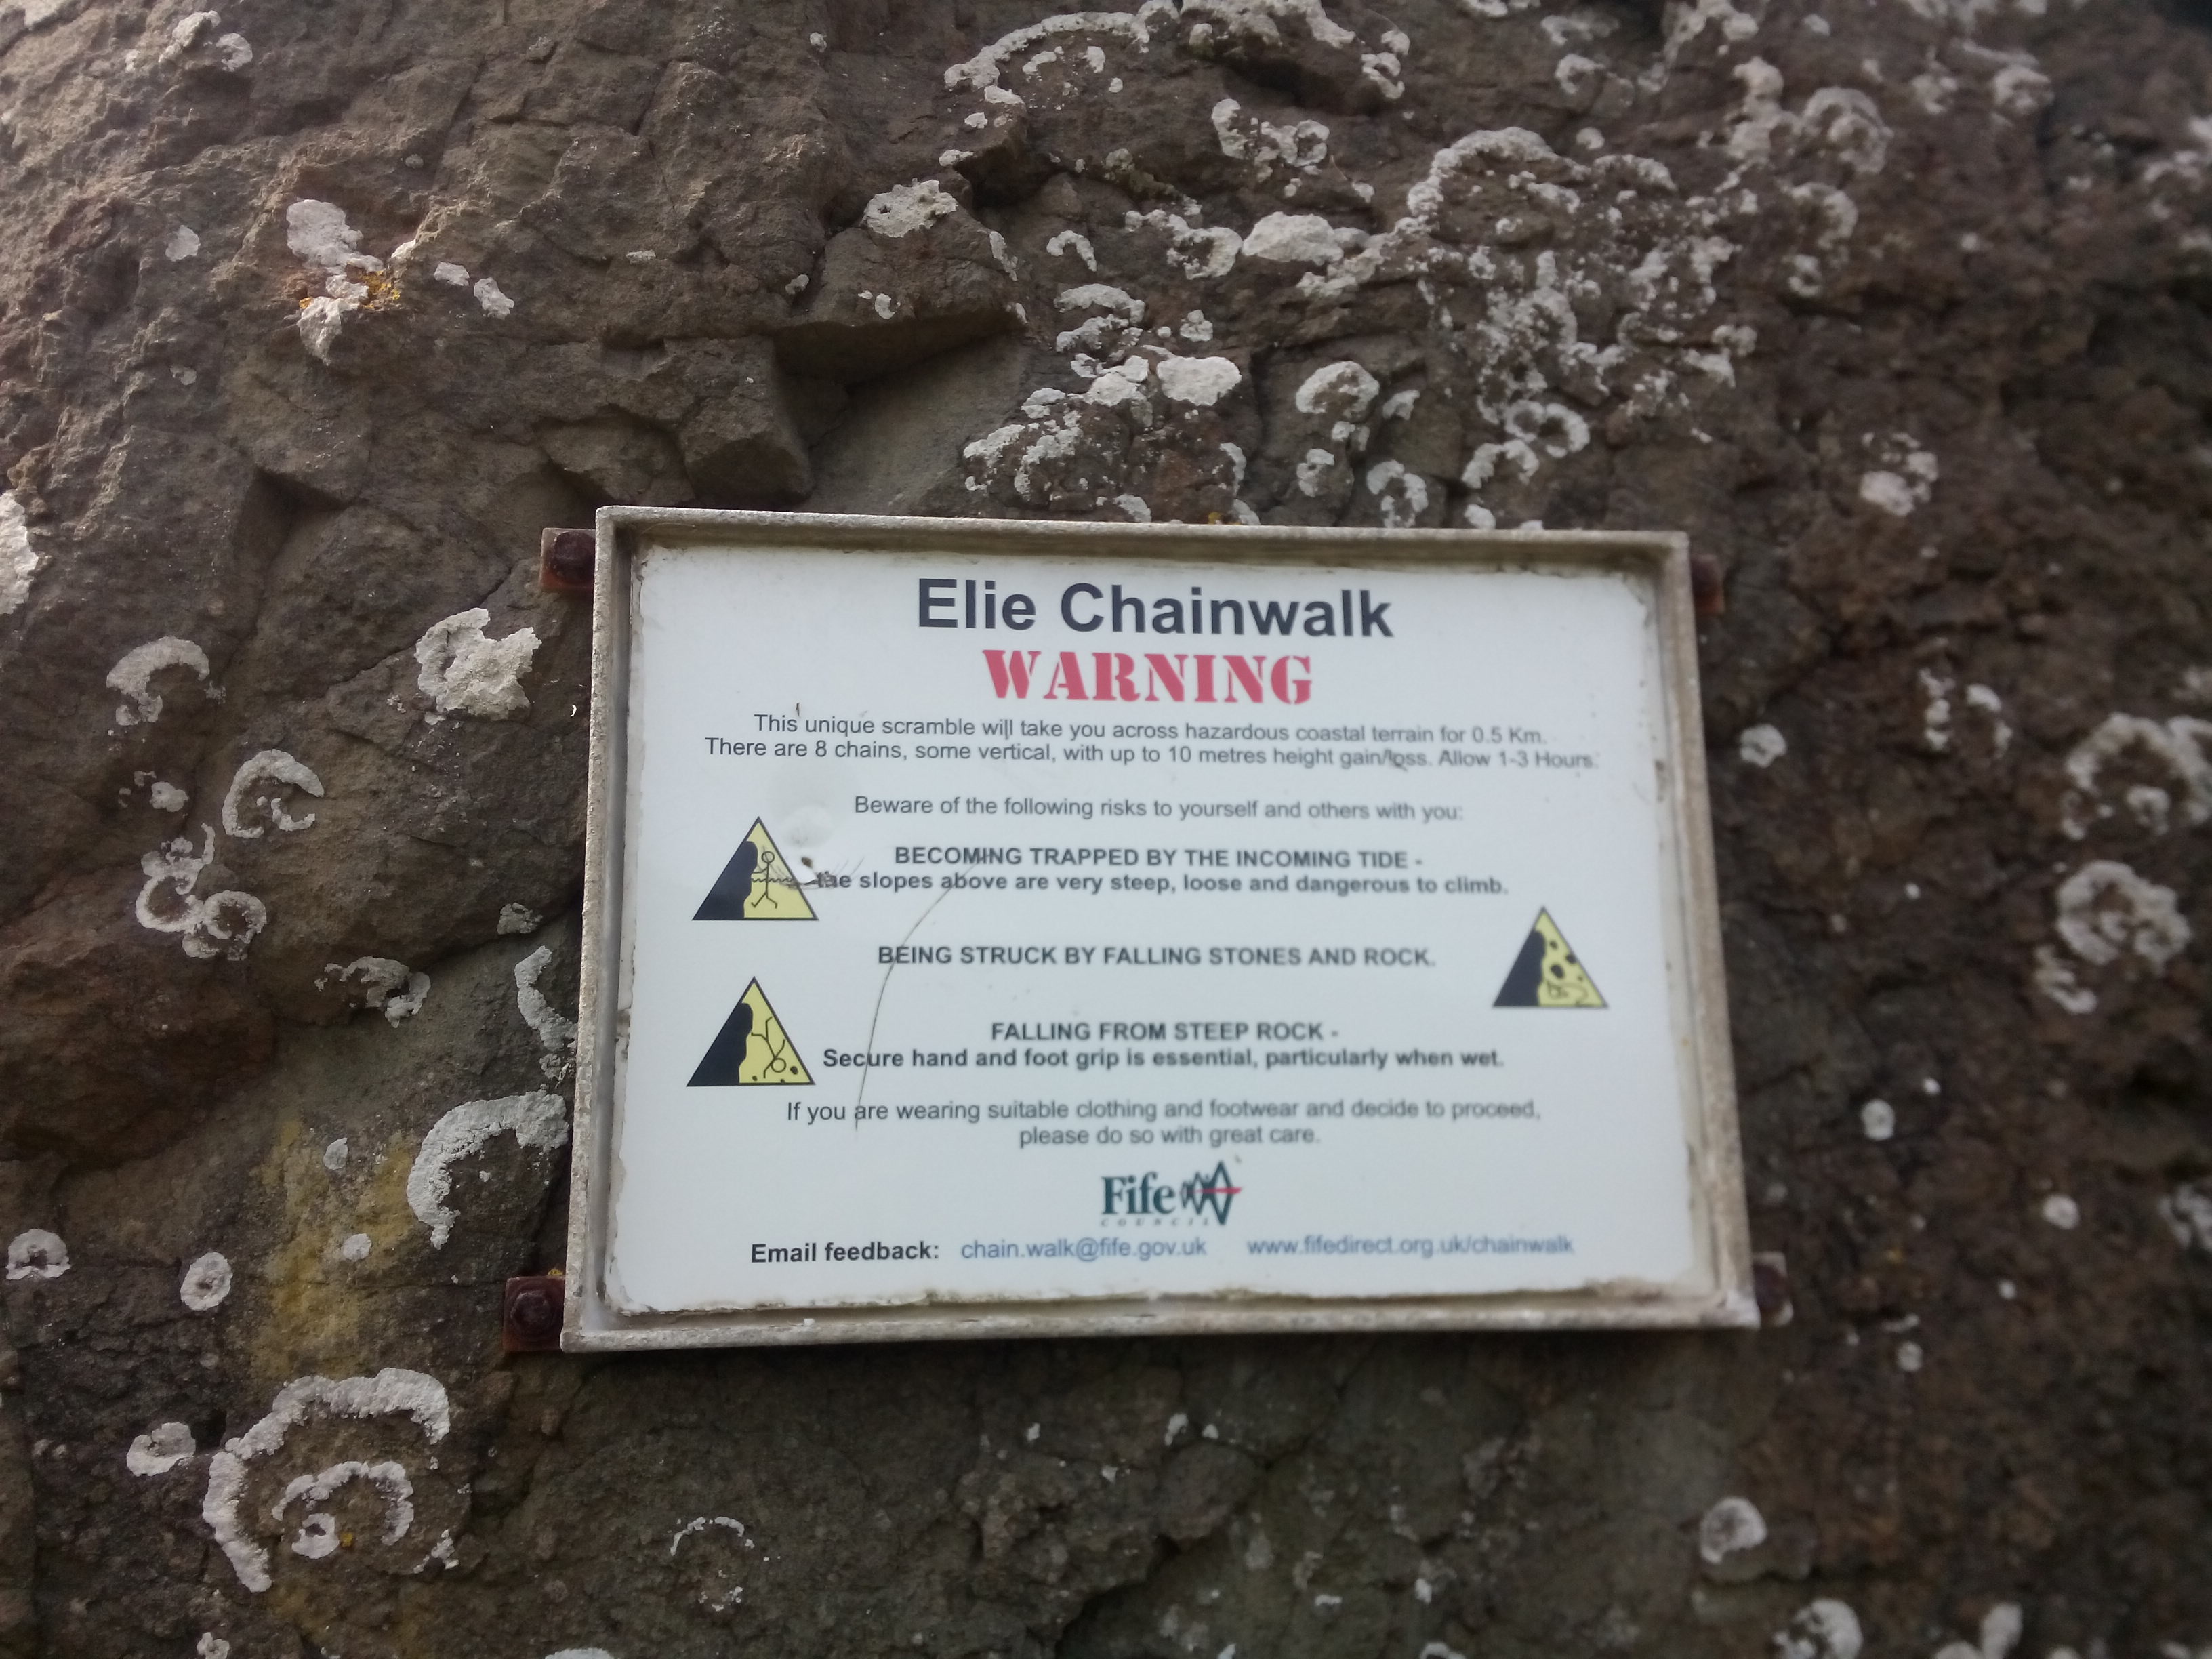 A sign on a rock WARNING about the Elie Chainwalk